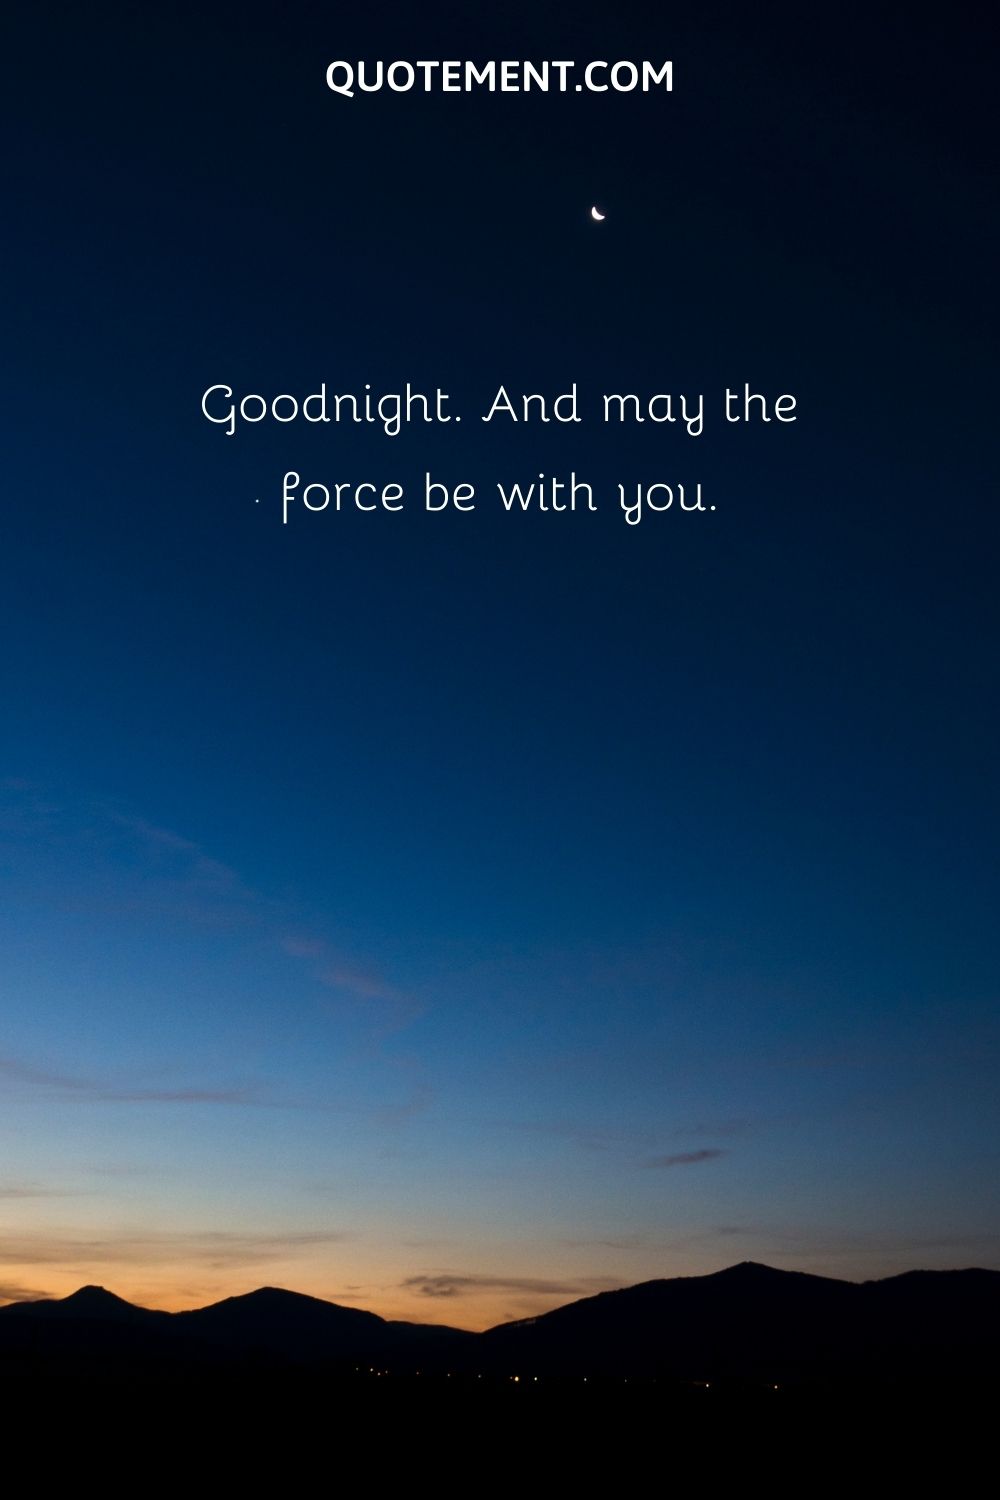 Goodnight. And may the force be with you